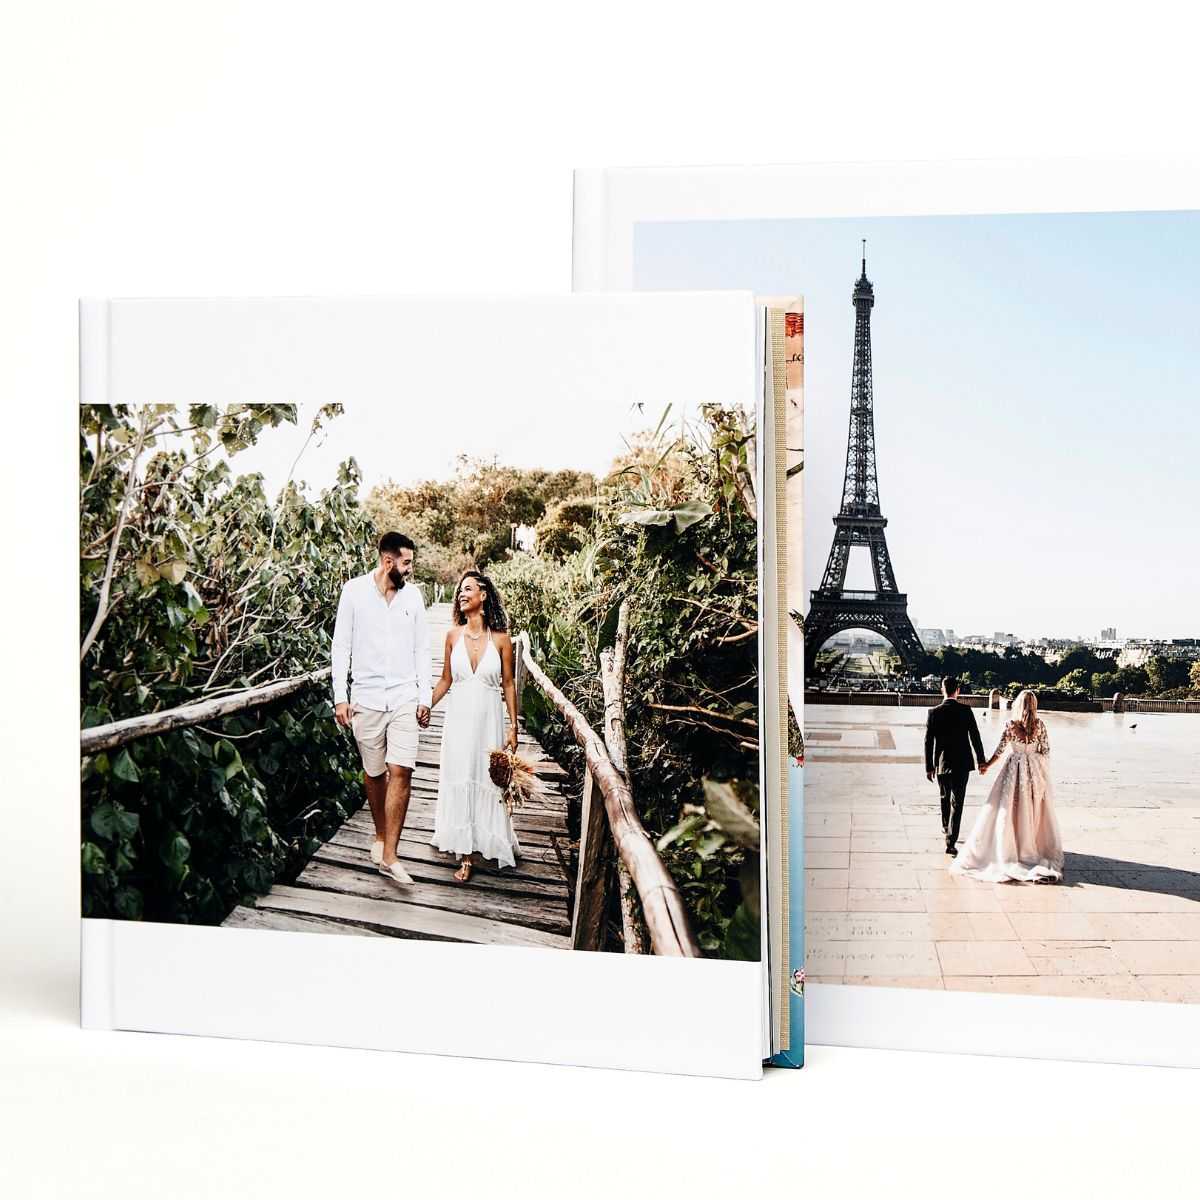 Hardcover photo book with young couple travel photos